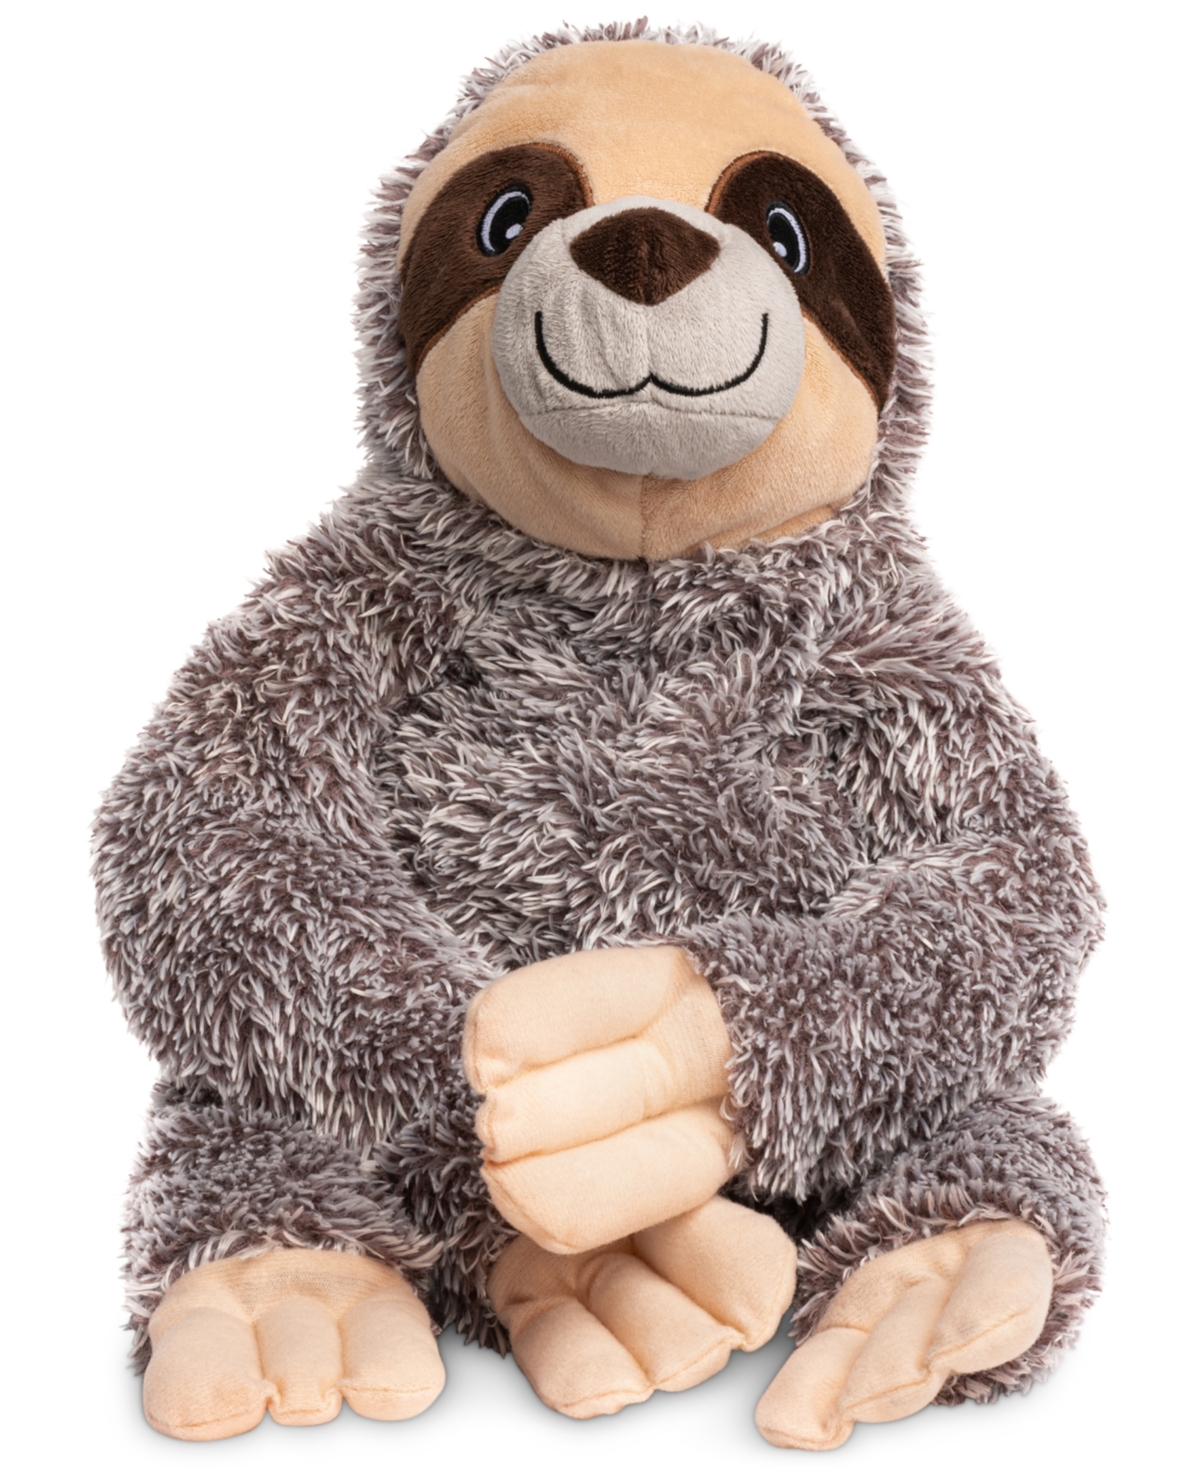 Fluffy Sloth Pet Toy, Small - Grey